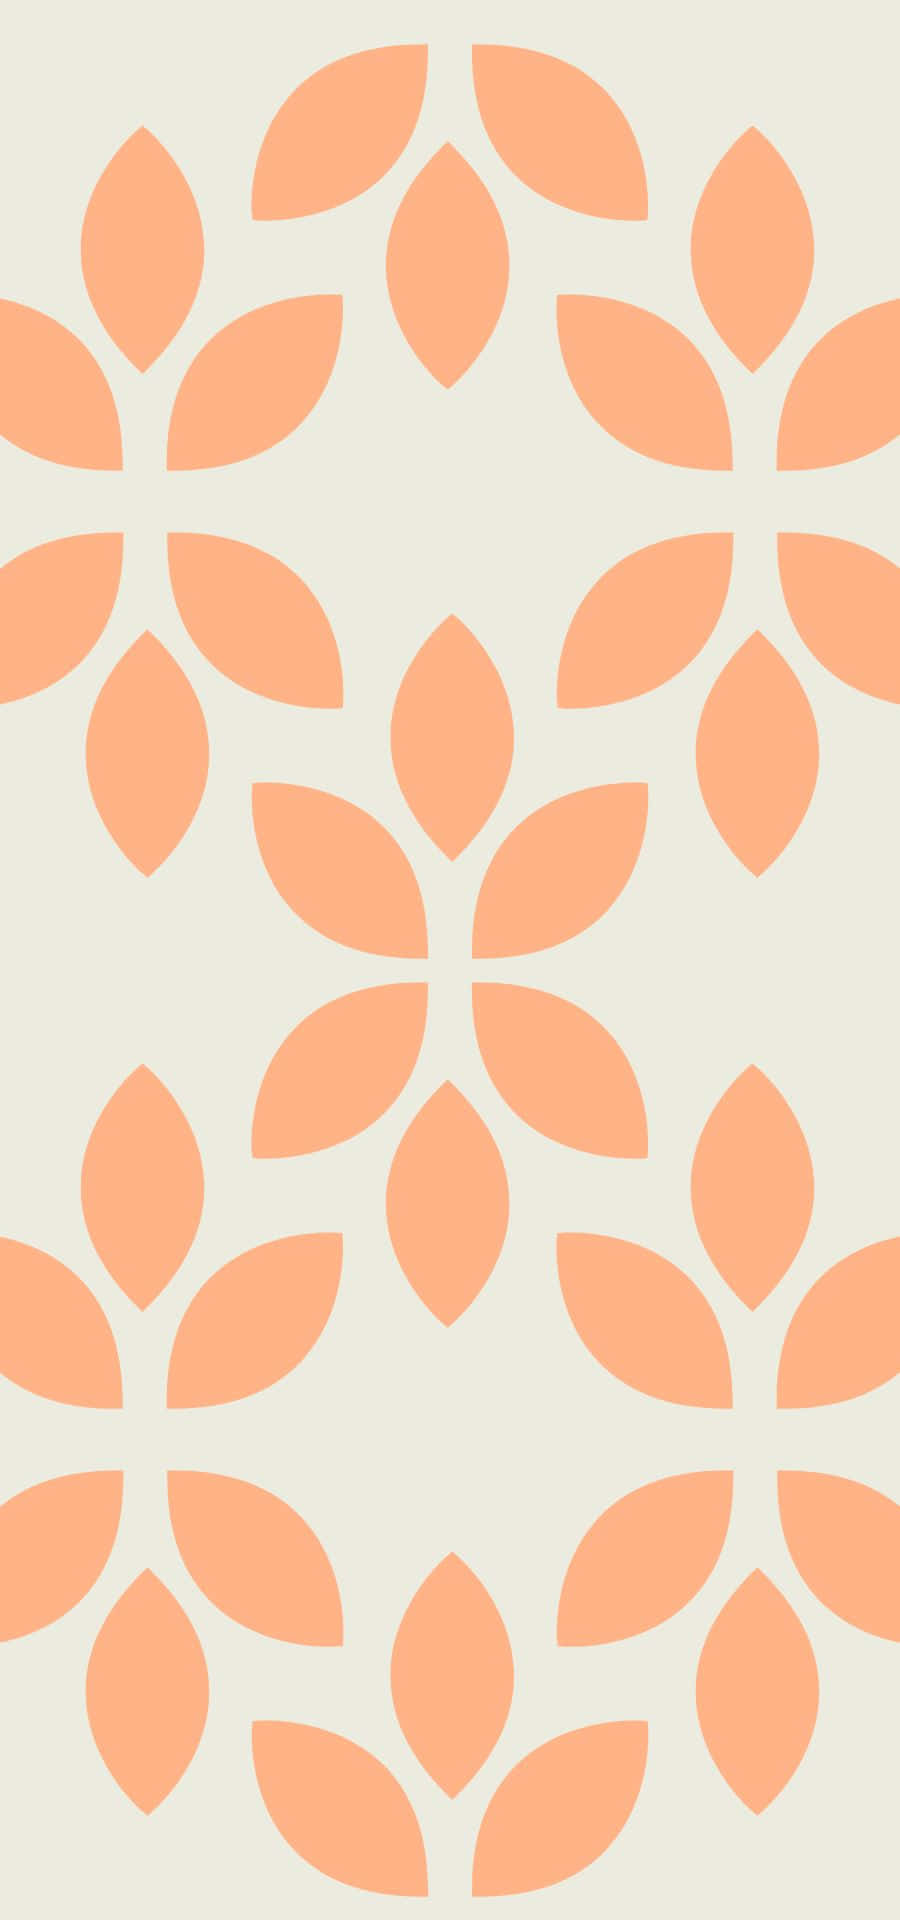 A Pattern Of Leaves In A Light Peach Color